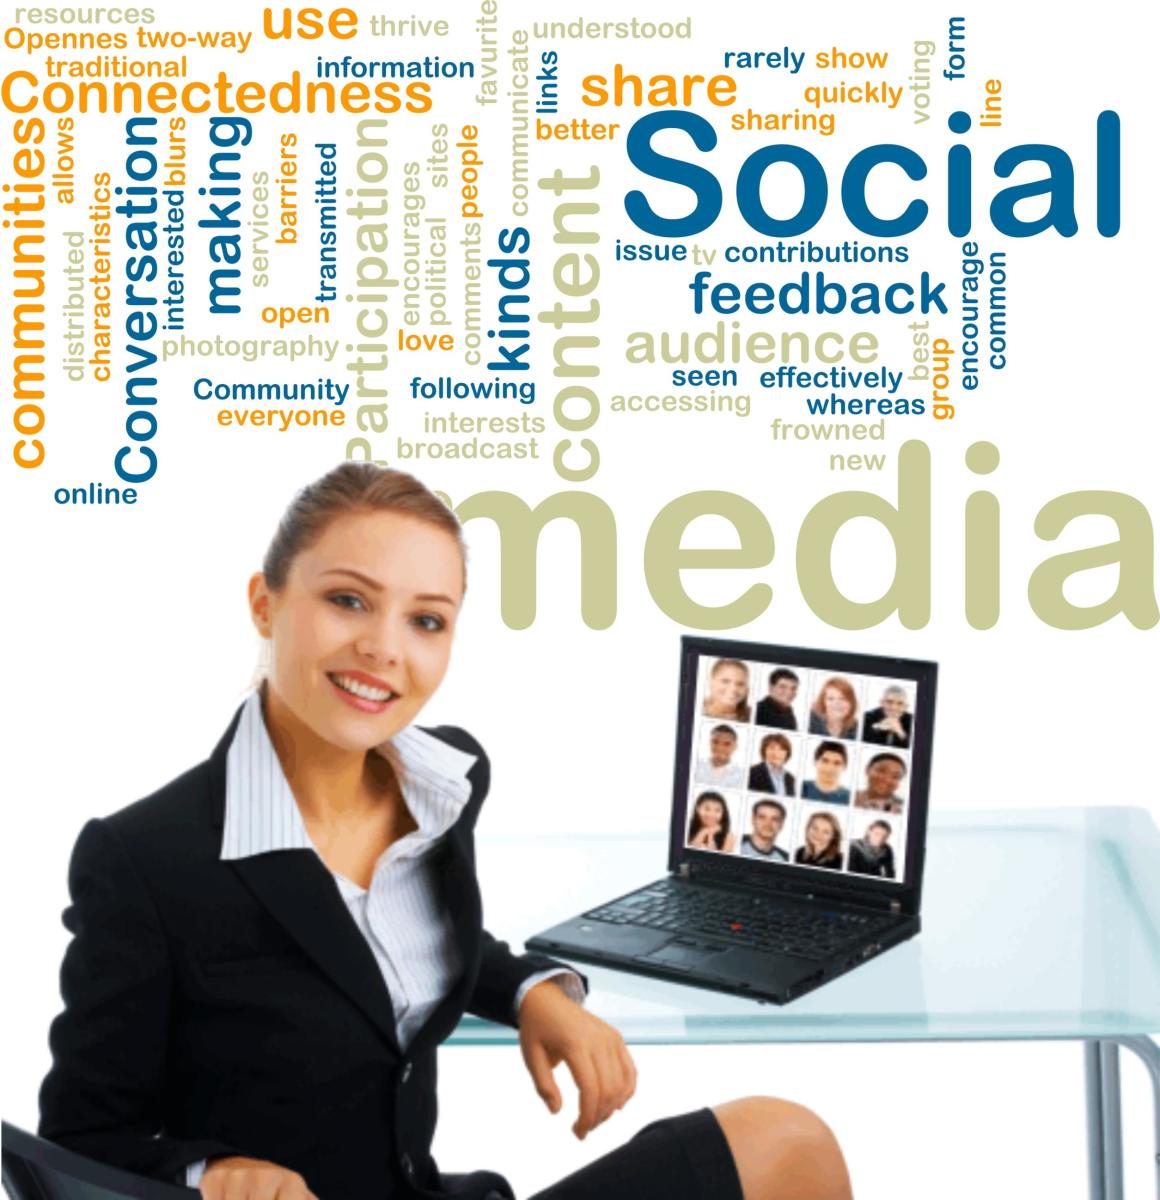 A modern part time jobs that is in demand is a Social Media Coordinator.  